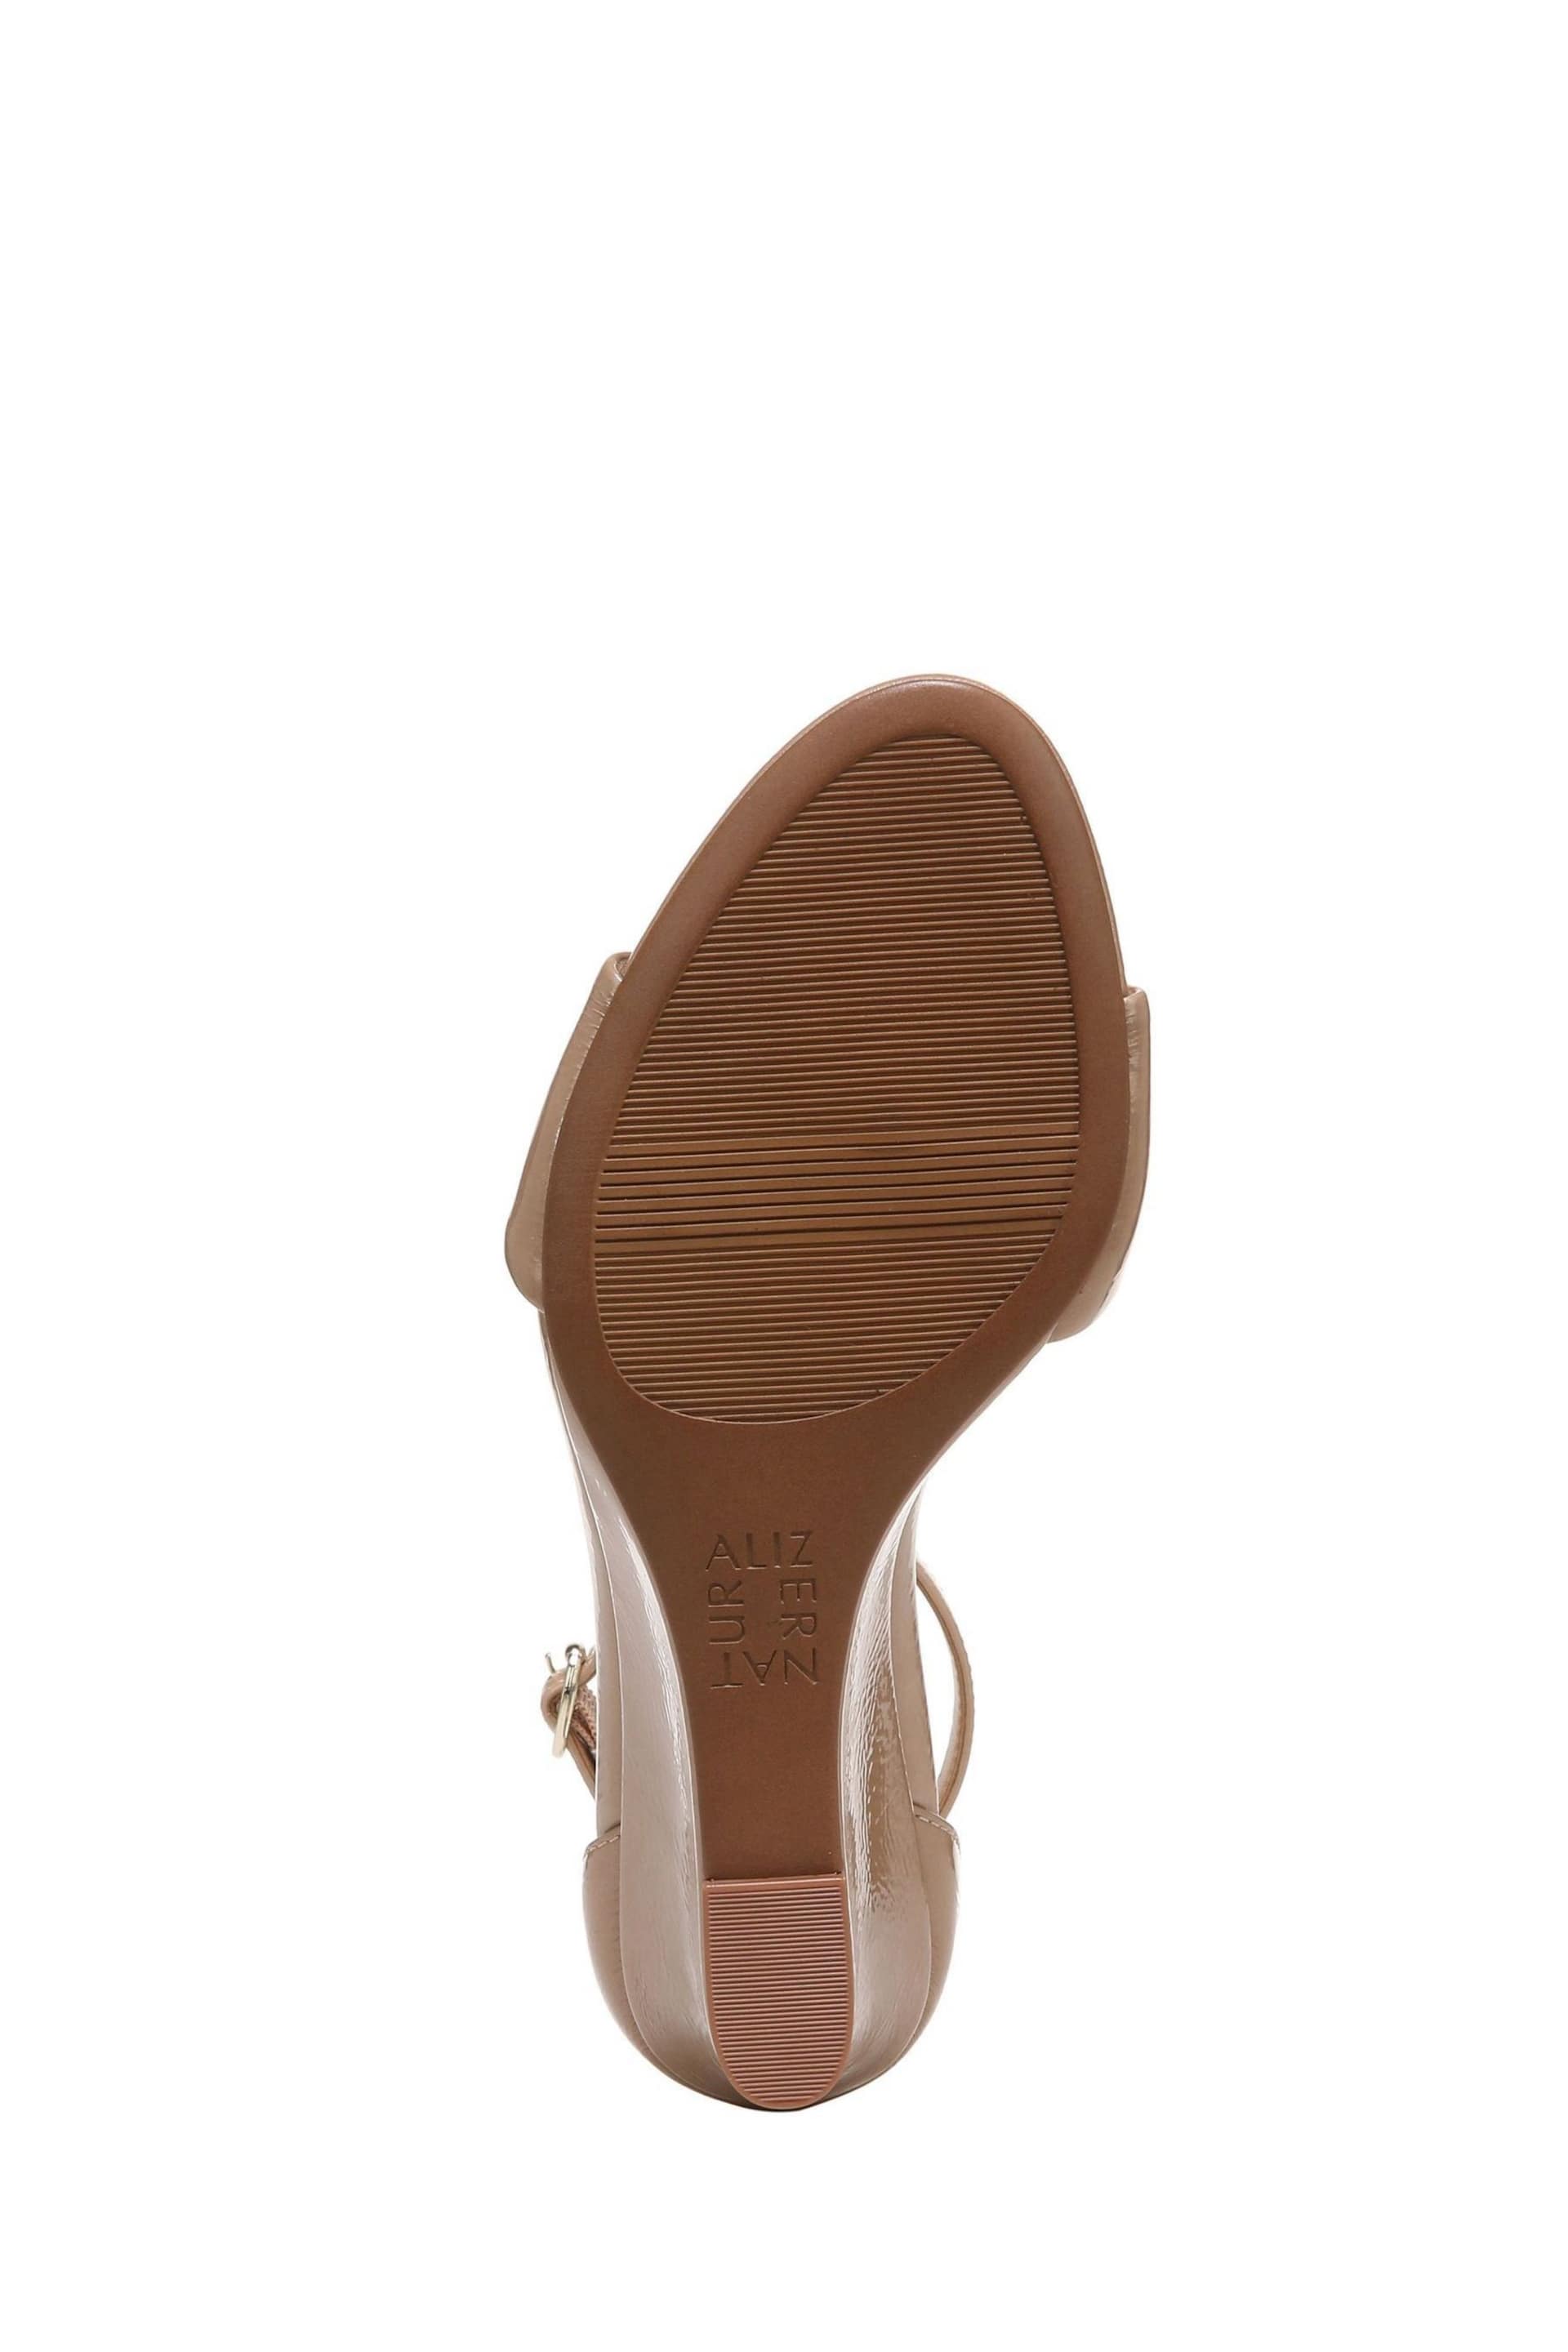 Naturalizer Vera-Wedge Ankle Straps Sandals - Image 4 of 7